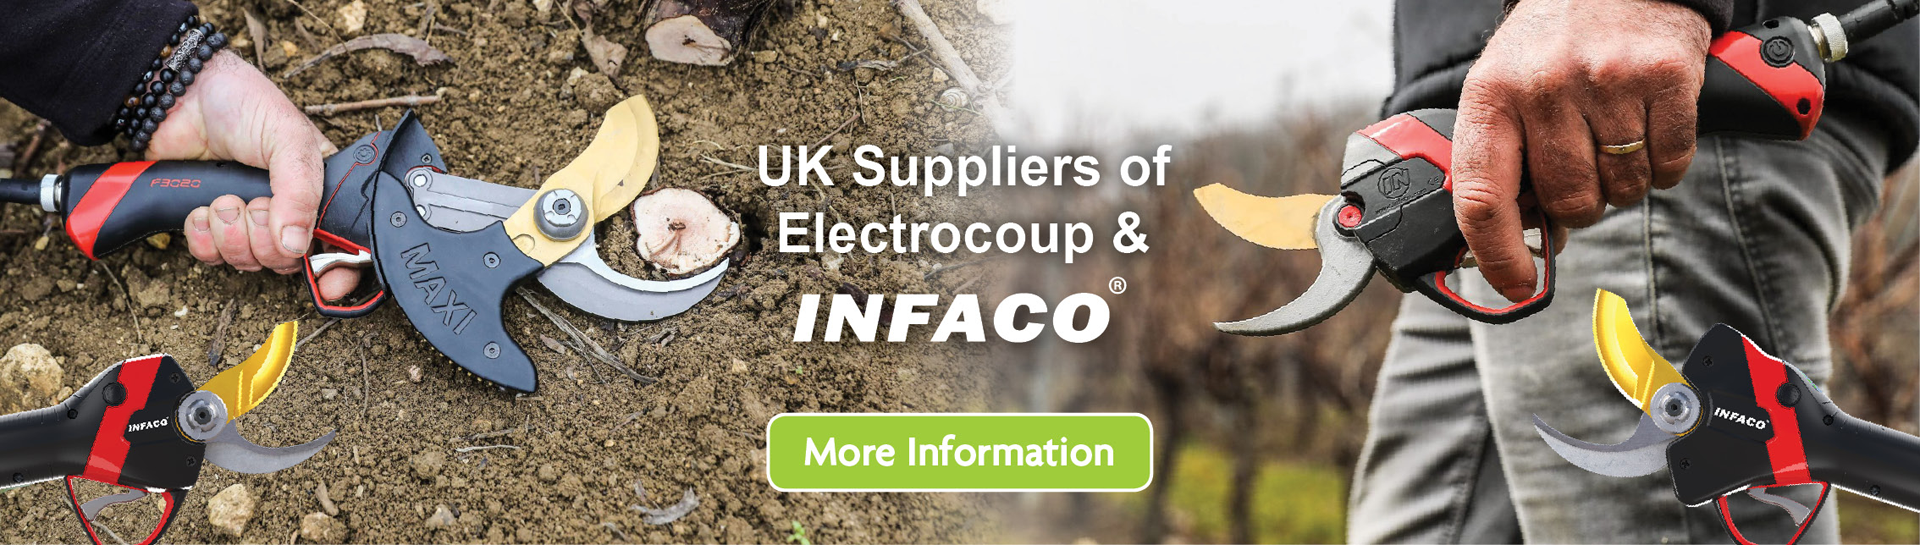 Shop Now for Viticultural Supplies. Agricare are Britain's leading supplier of specialist supplies to farmers and growers throughout the UK